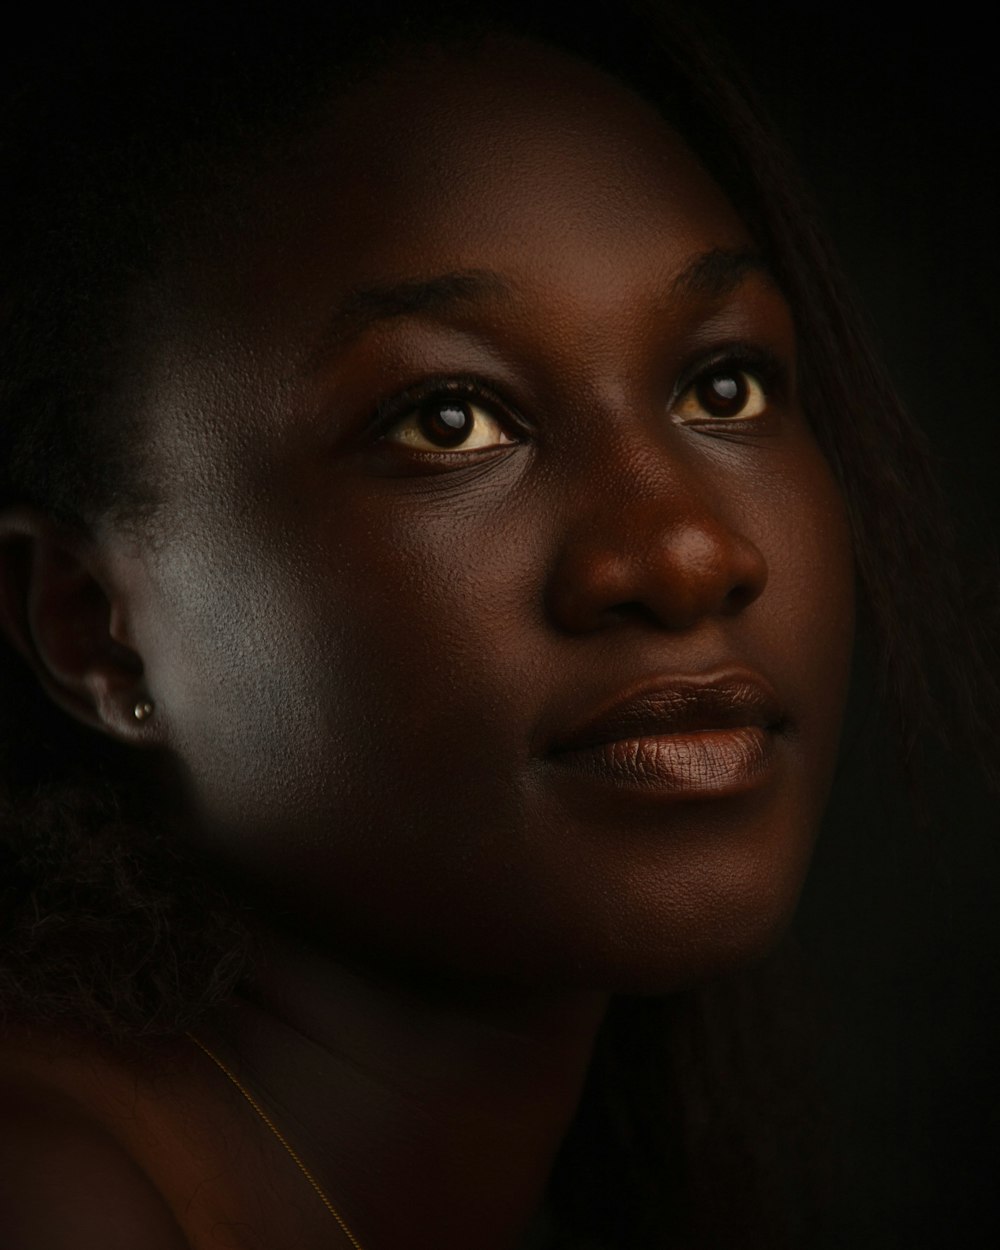 a close up of a woman's face with a dark background